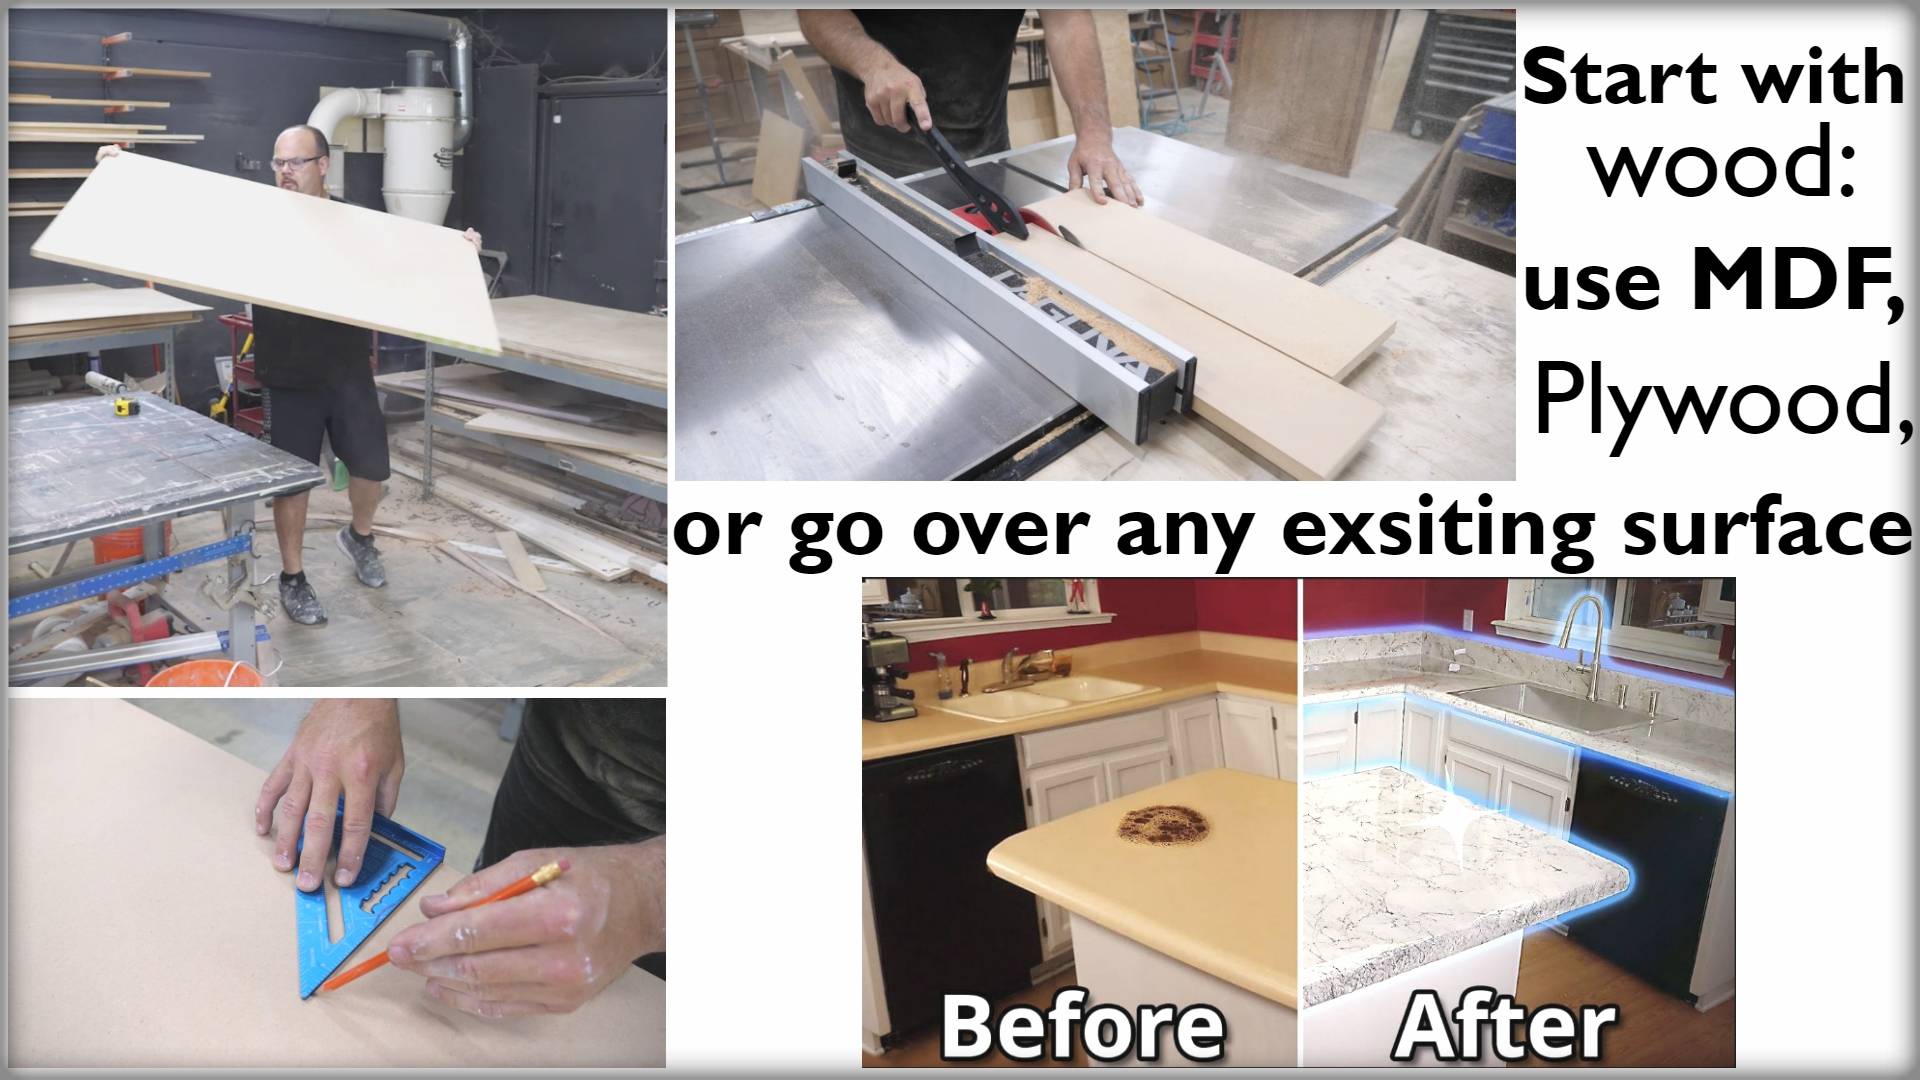 Start with wood: Use MDF, plywood, or go over any existing surface. Before and After.